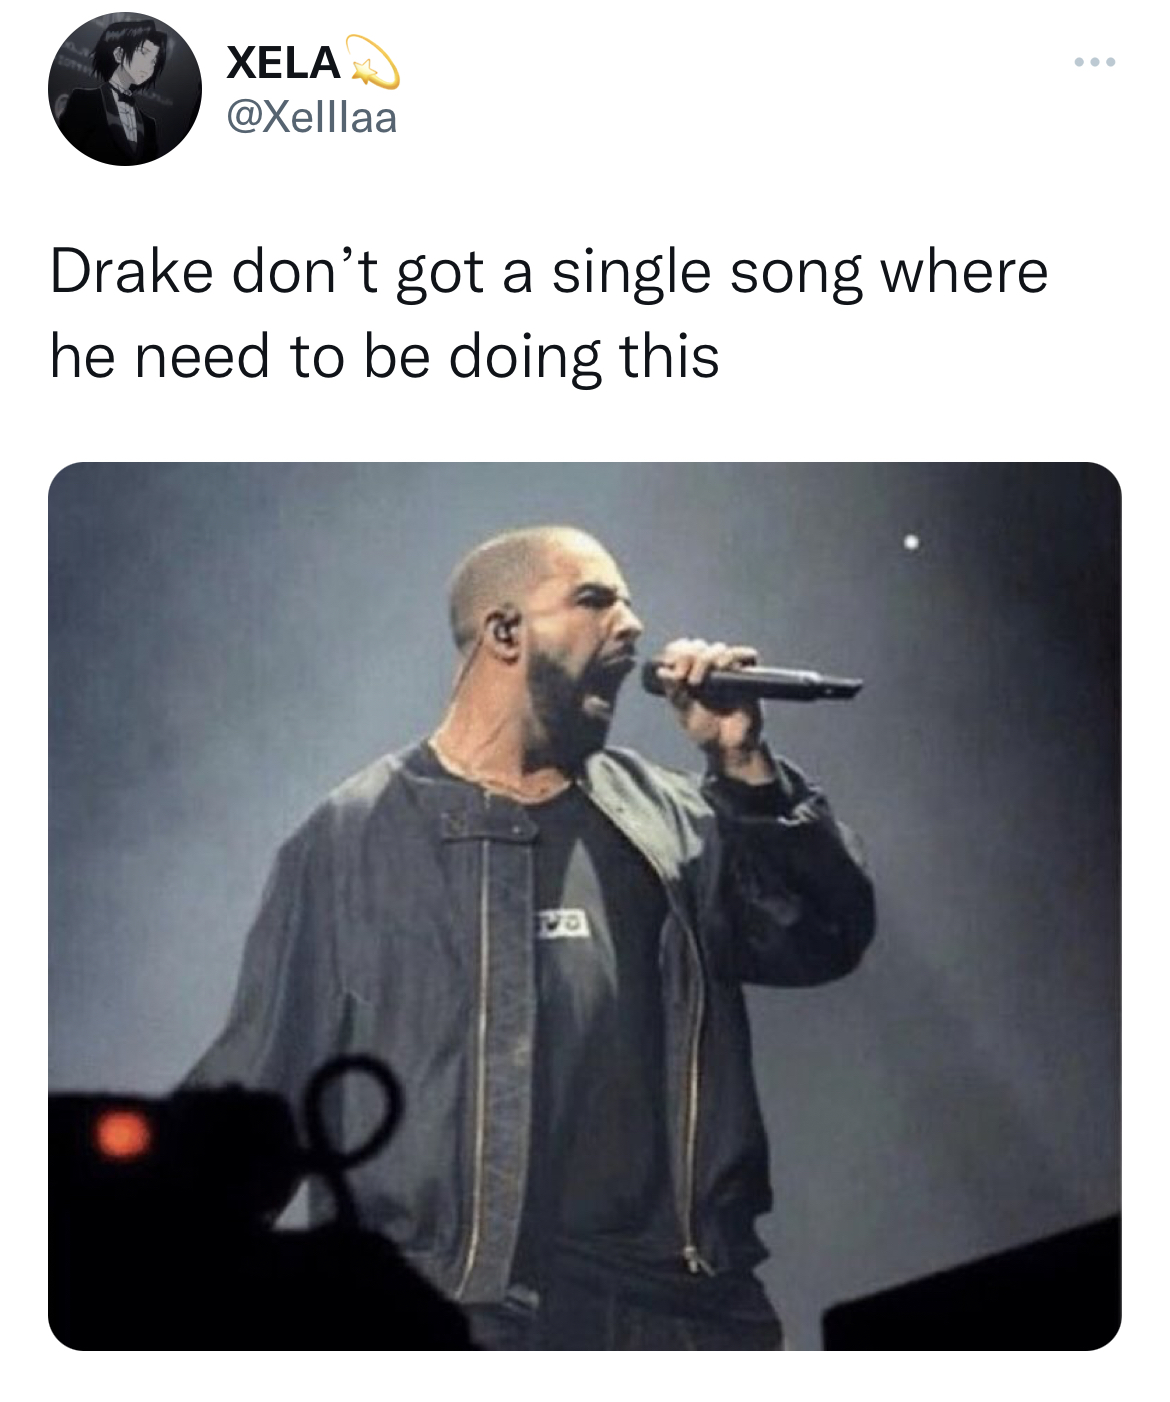 savage tweets to start the week - microphone - Xela Drake don't got a single song where he need to be doing this R va 512